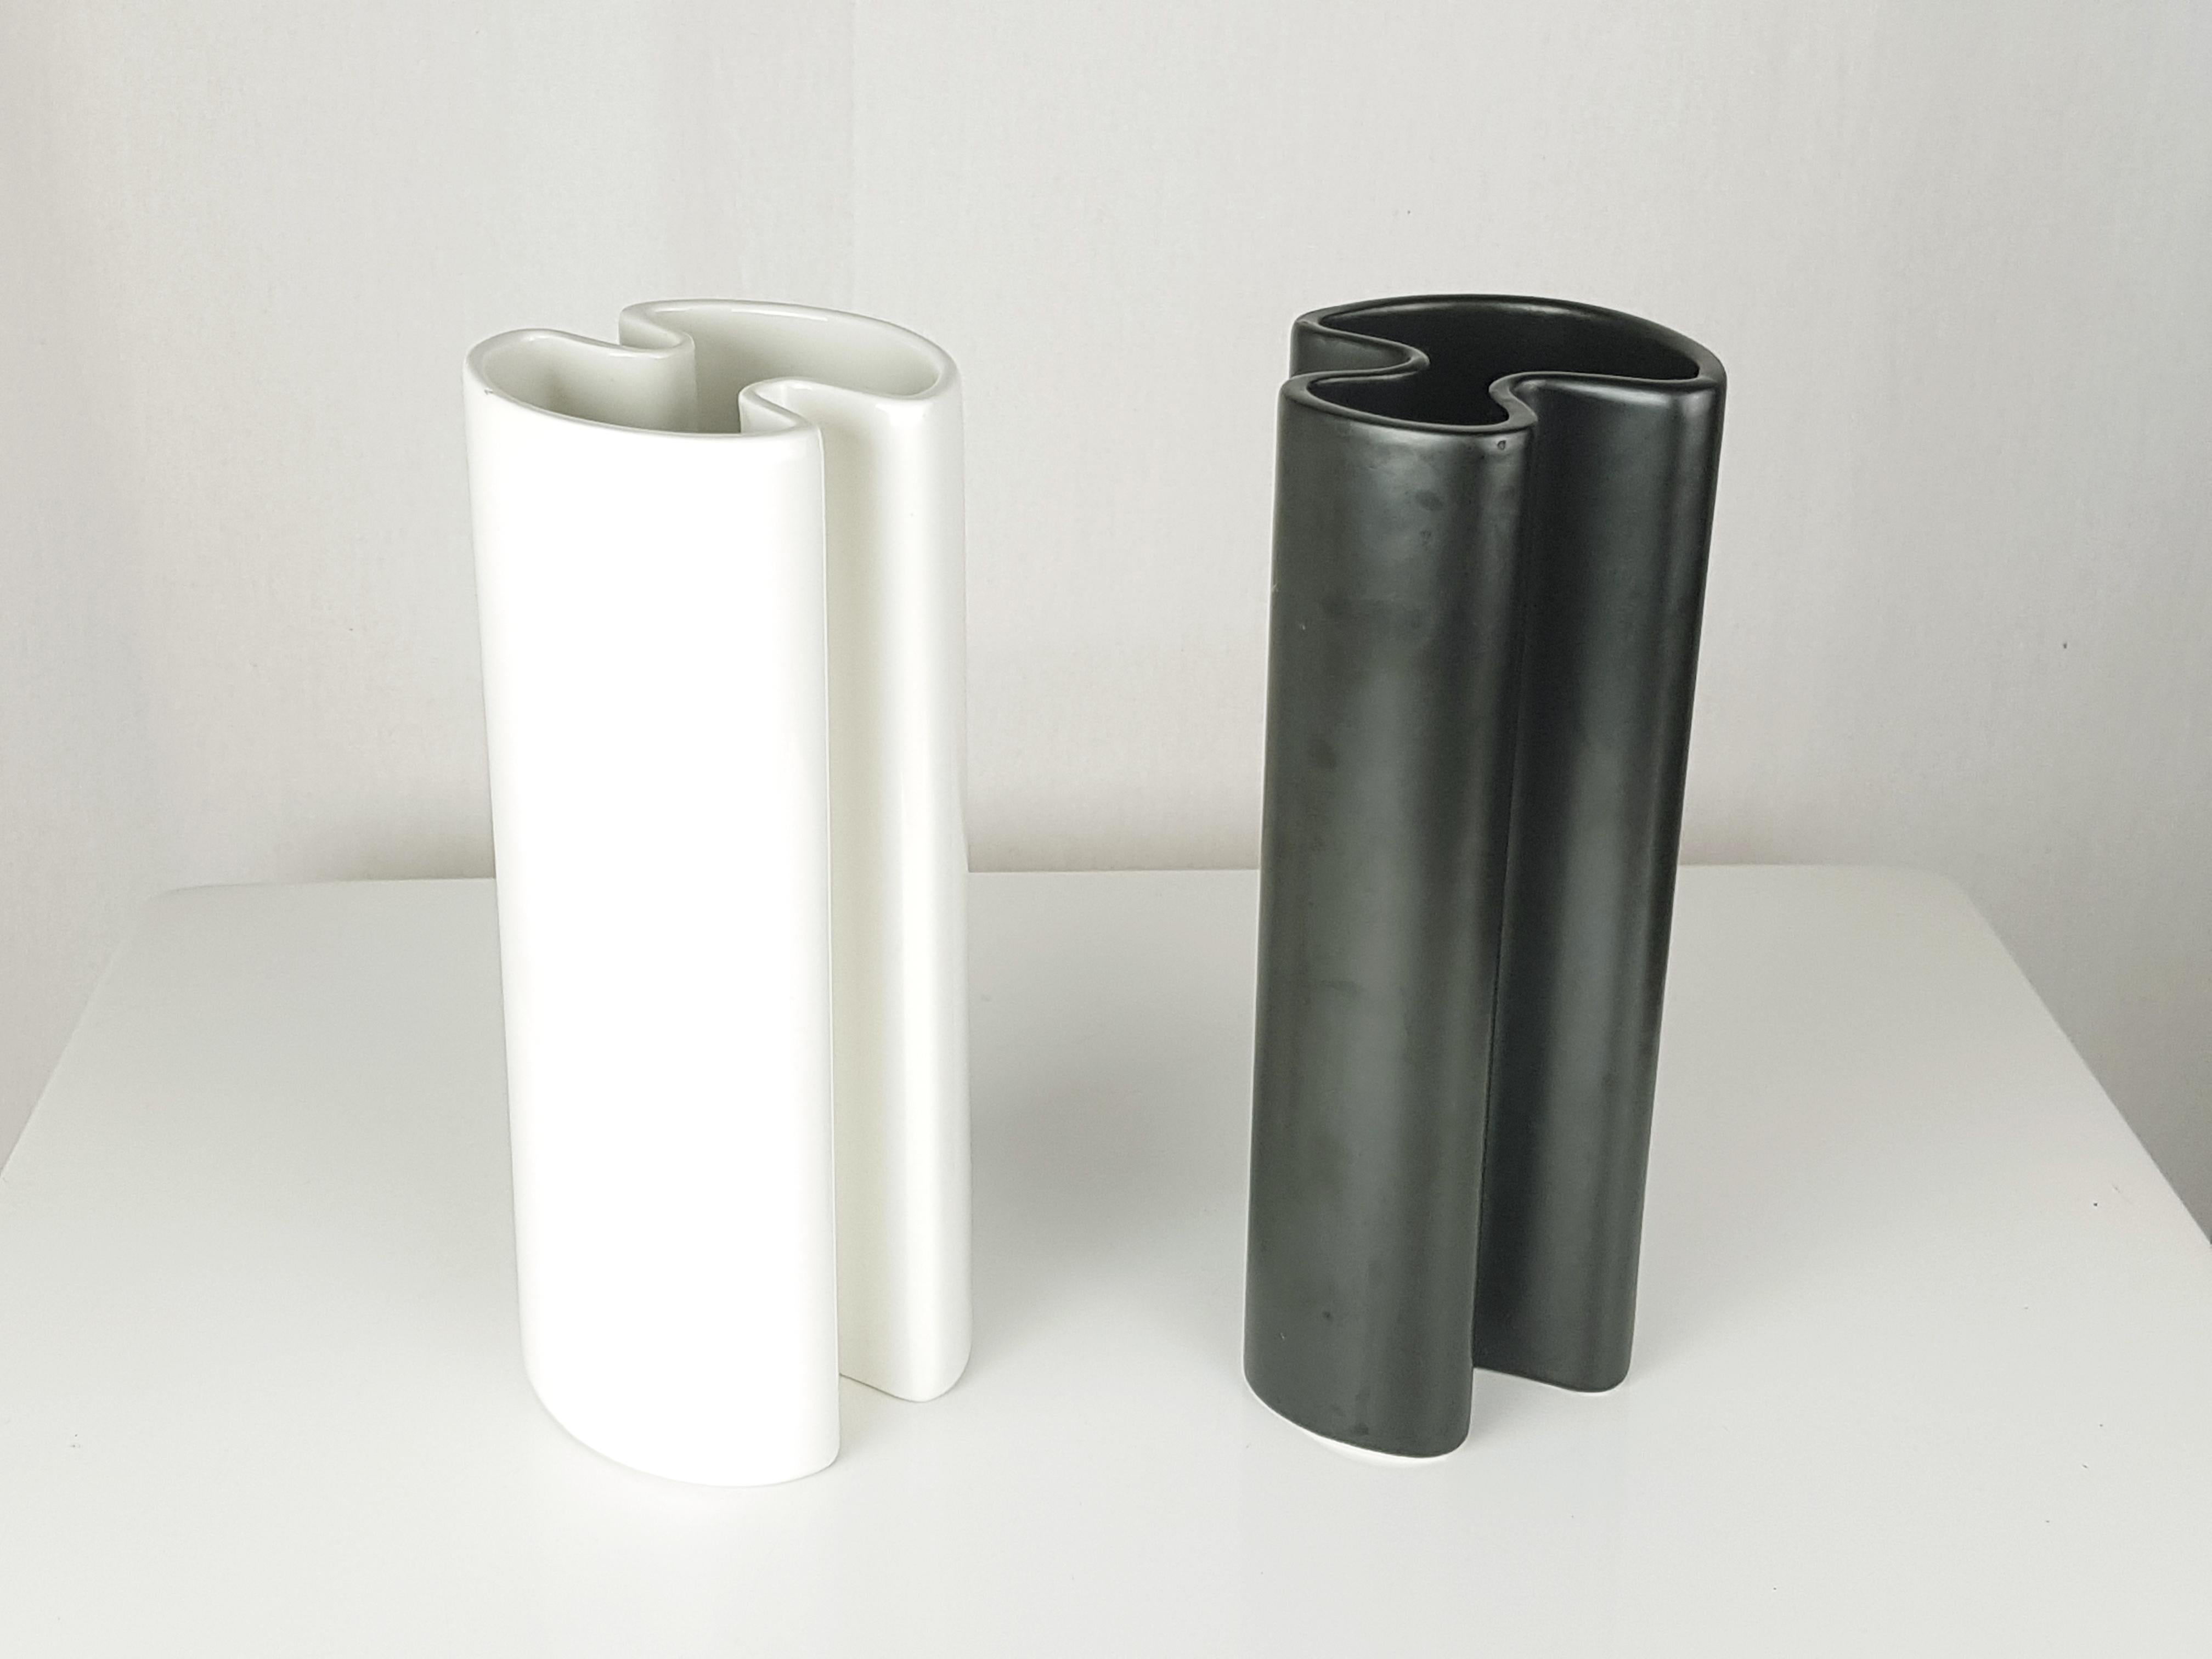 Philippines Black and White Ceramic Vases by Angelo Mangiarotti for Danese, 1964 For Sale 1